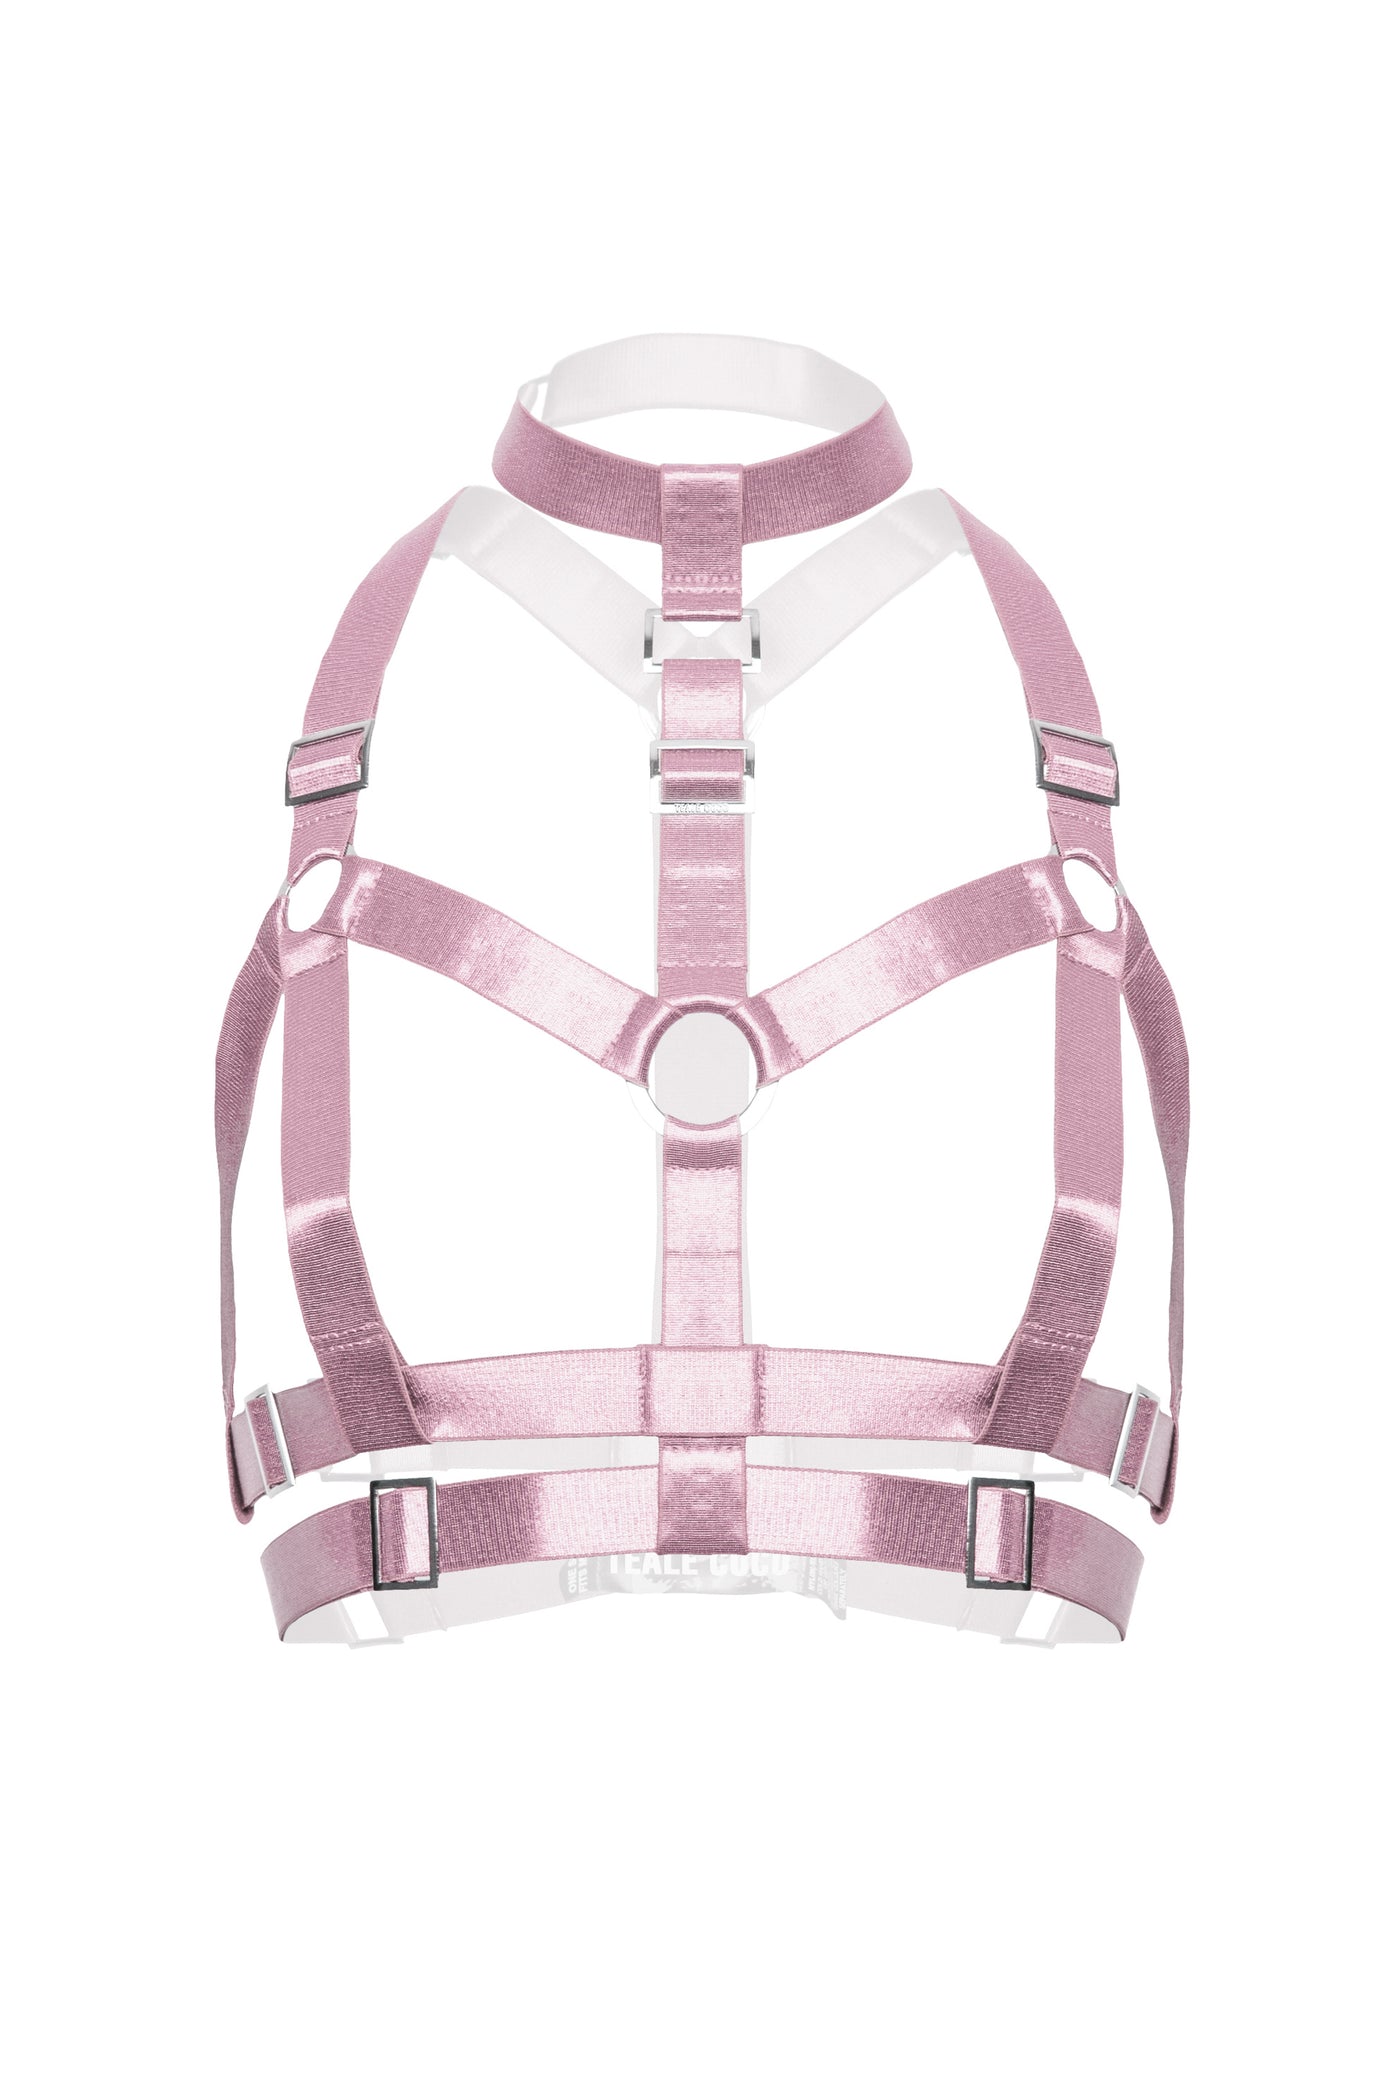 Collar Bust Harness - Dusted Pink